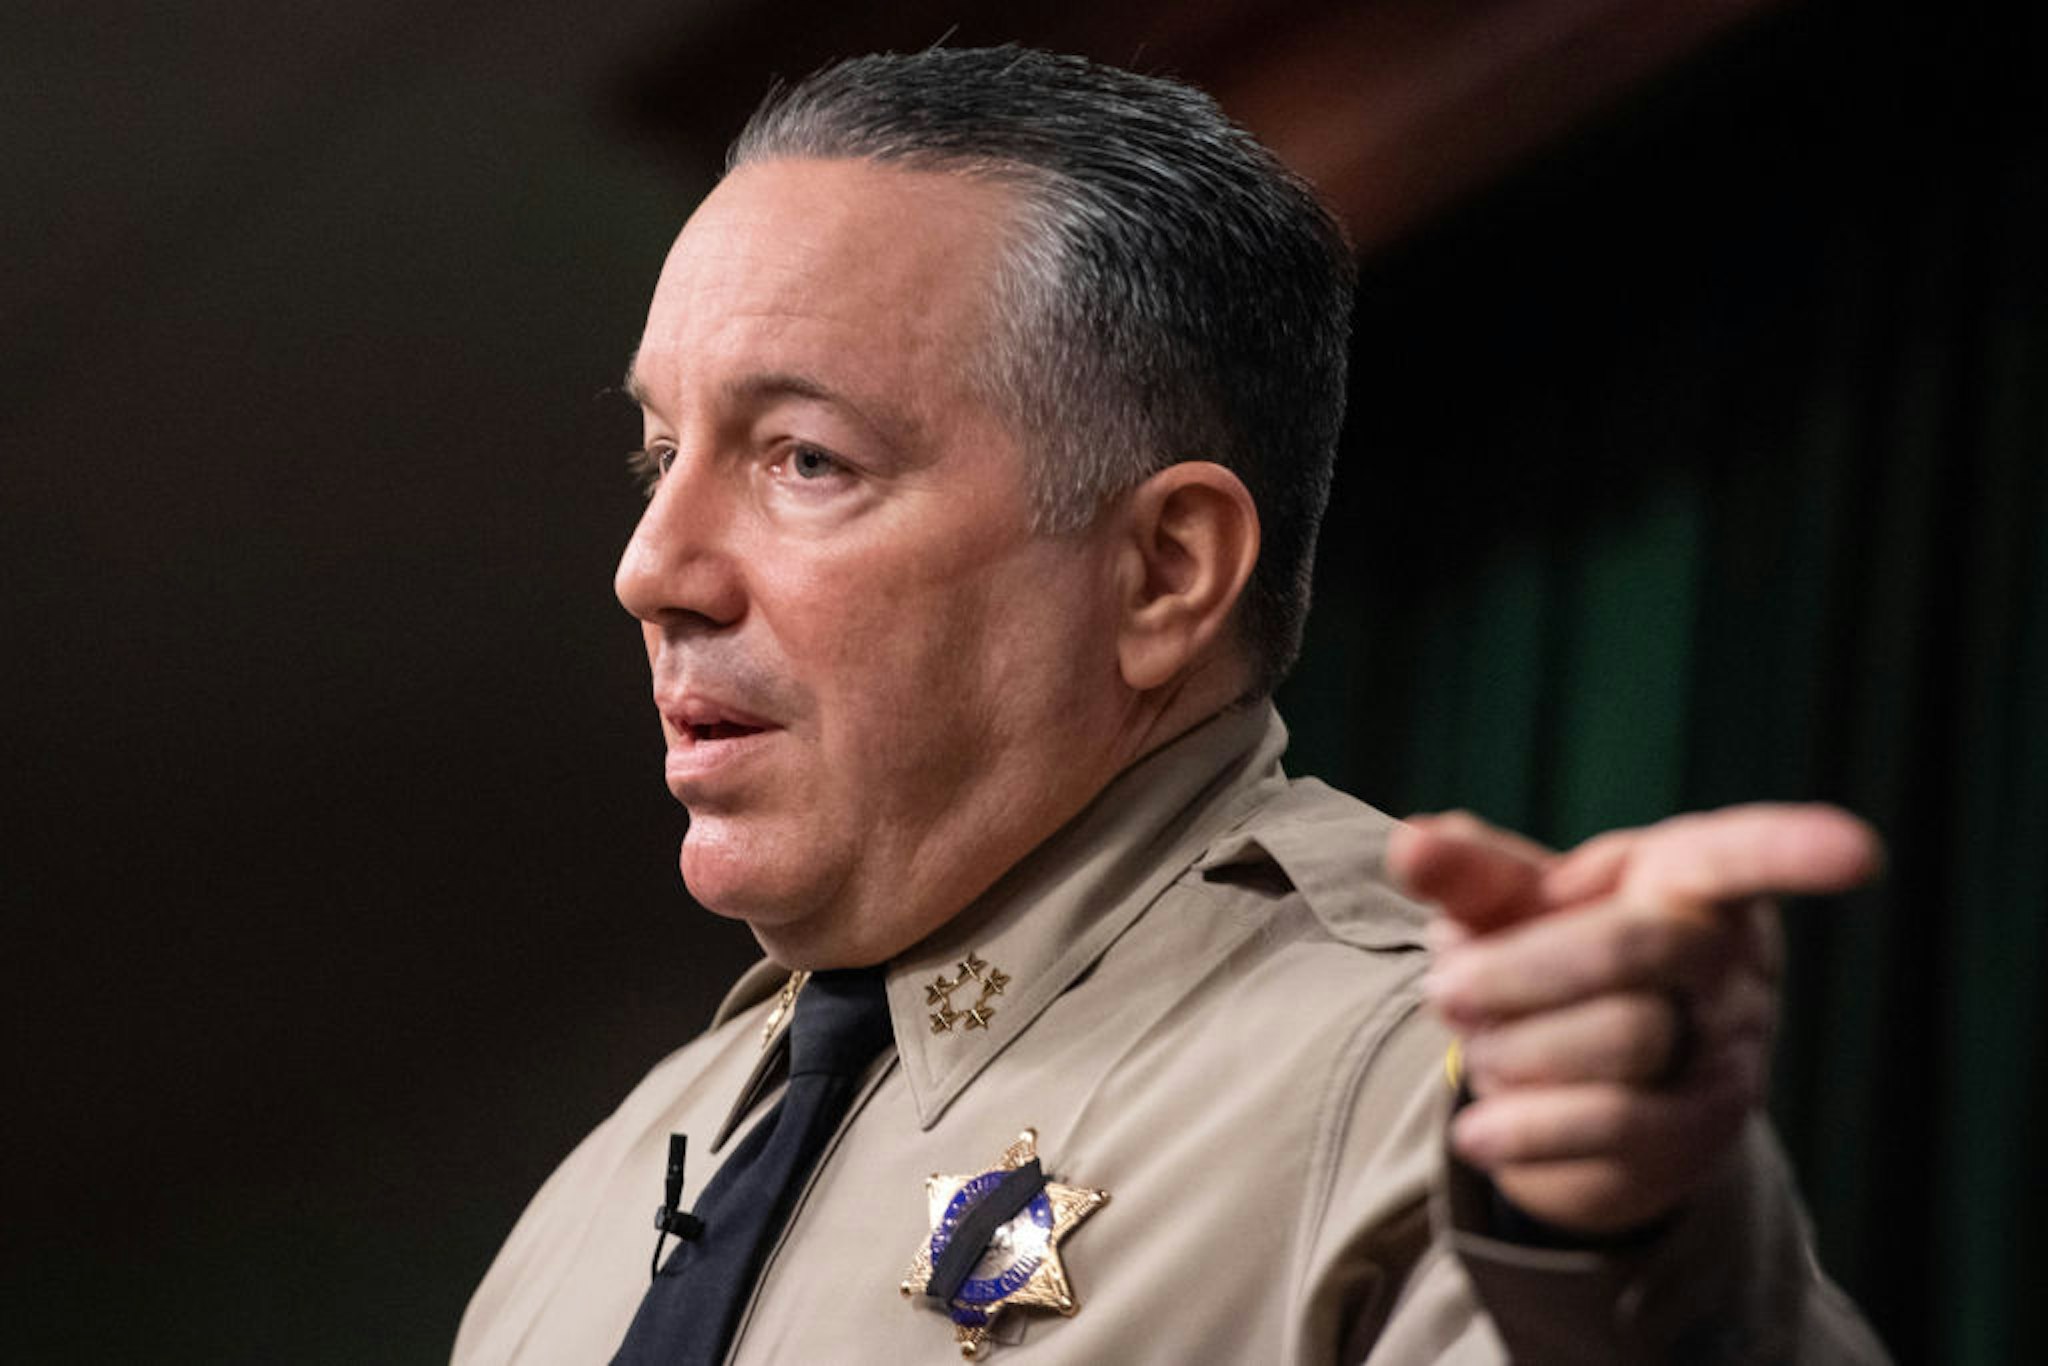 Los Angeles, CA - January 19:Los Angeles County Sheriff Alex Villanueva holds a news conference to discuss crime statistics, staffing and budgets on Wednesday, January 19, 2022 in Los Angeles. He called the citys homelessness crisis an open air mental asylum.